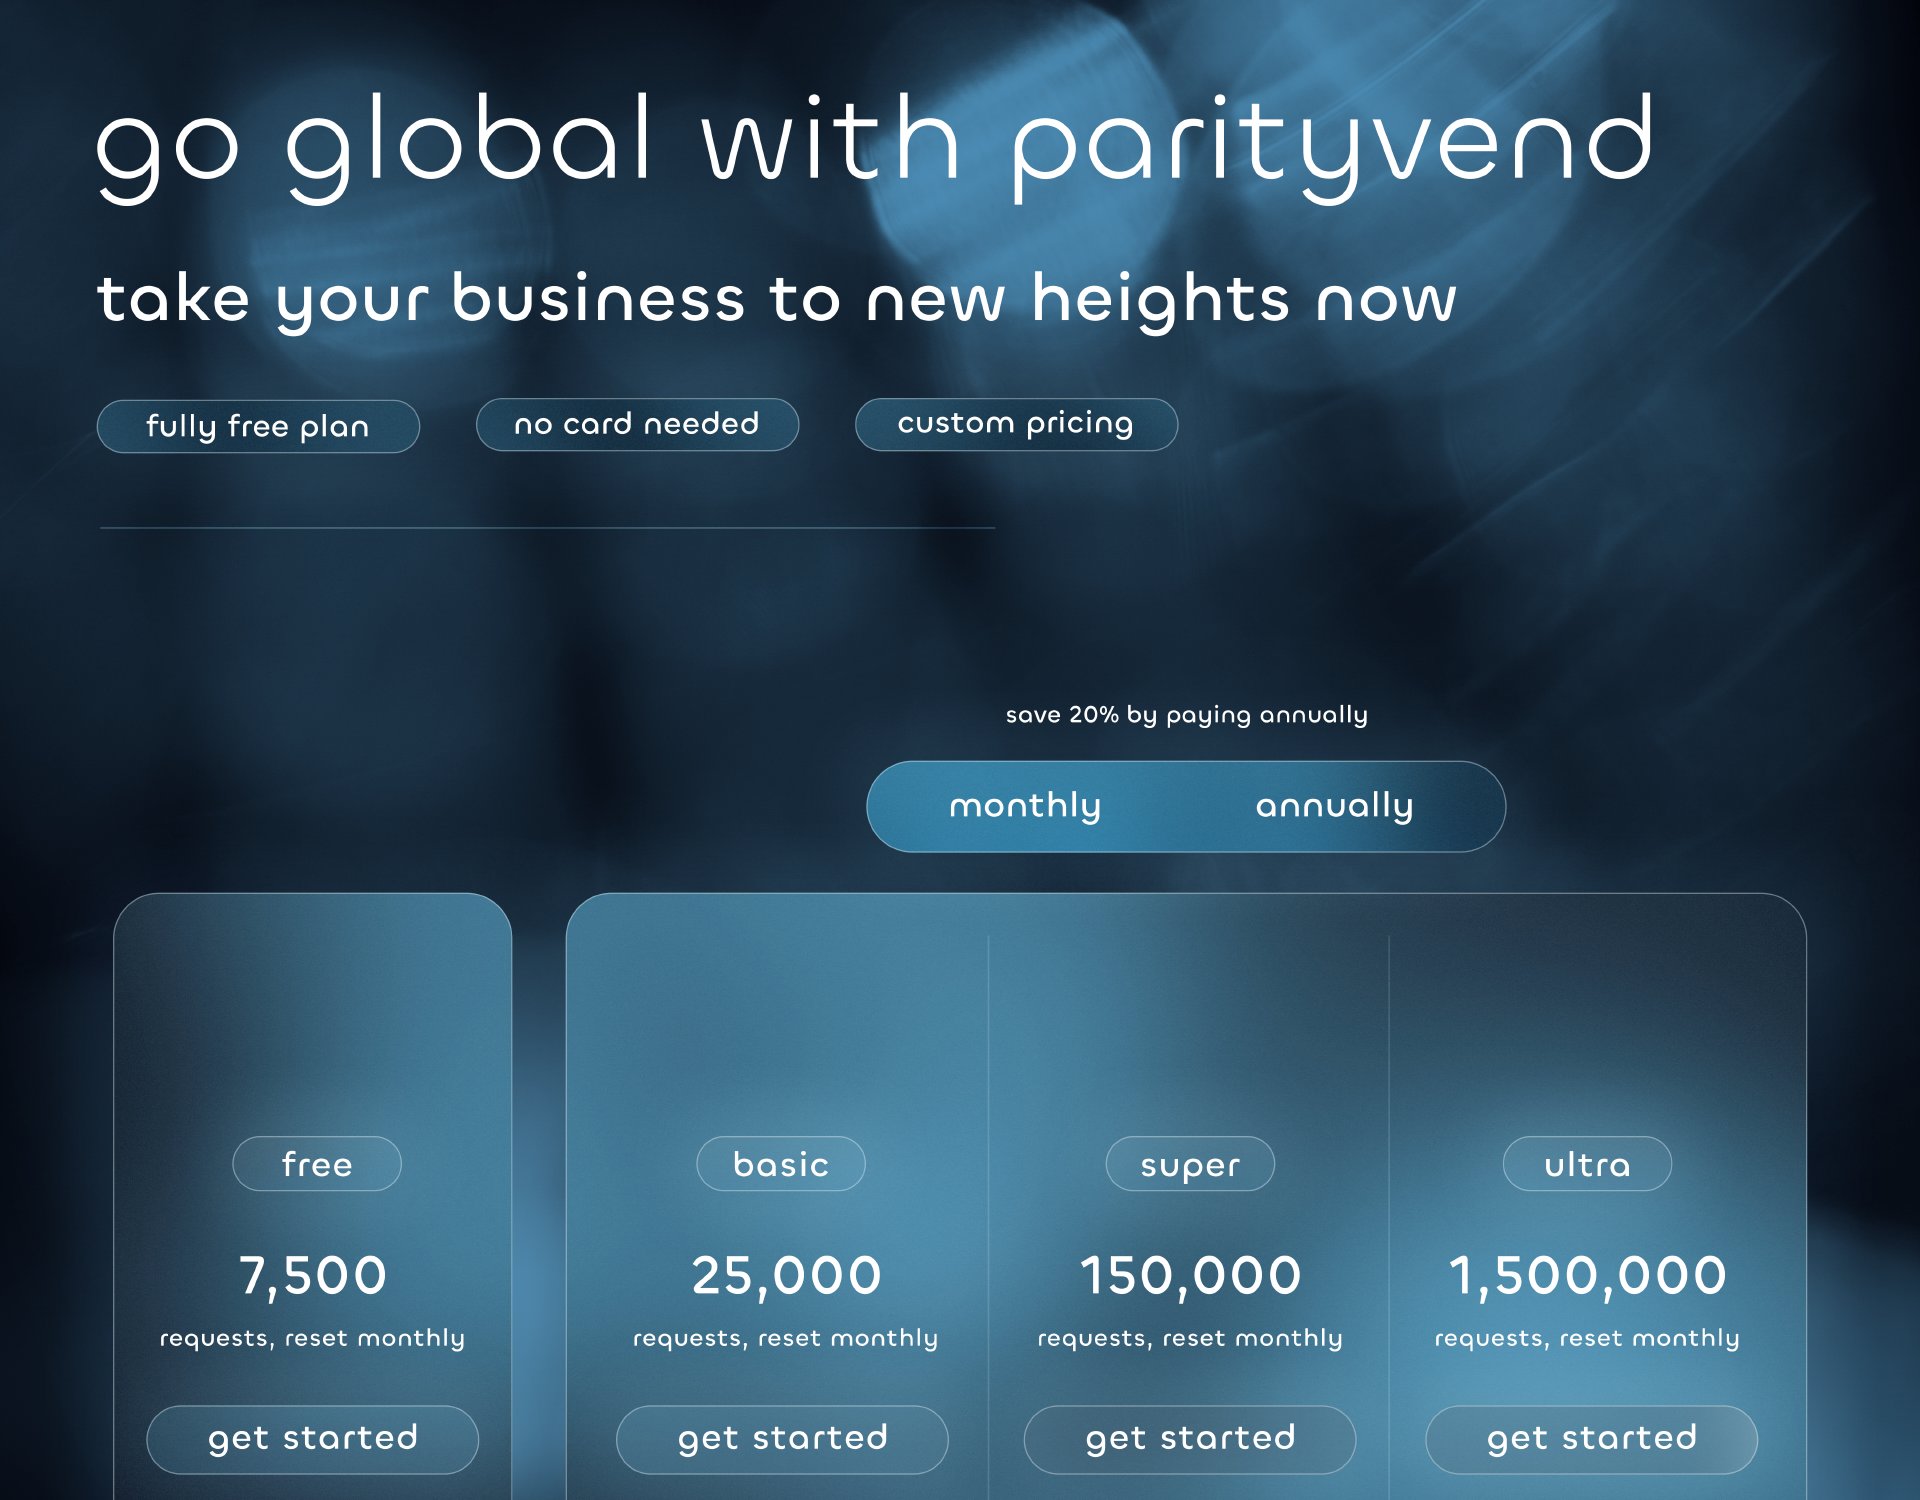 go global with parityvend. take your business to new heights now. fully free plan. no card needed. custom pricing. save 20% by paying annually. monthly and annually payments. $0 - free, 7,500 requests. $19 - basic, 25,000 requests. $49 - super, 150,000 requests. $99 - ultra, 1,500,000 requests.